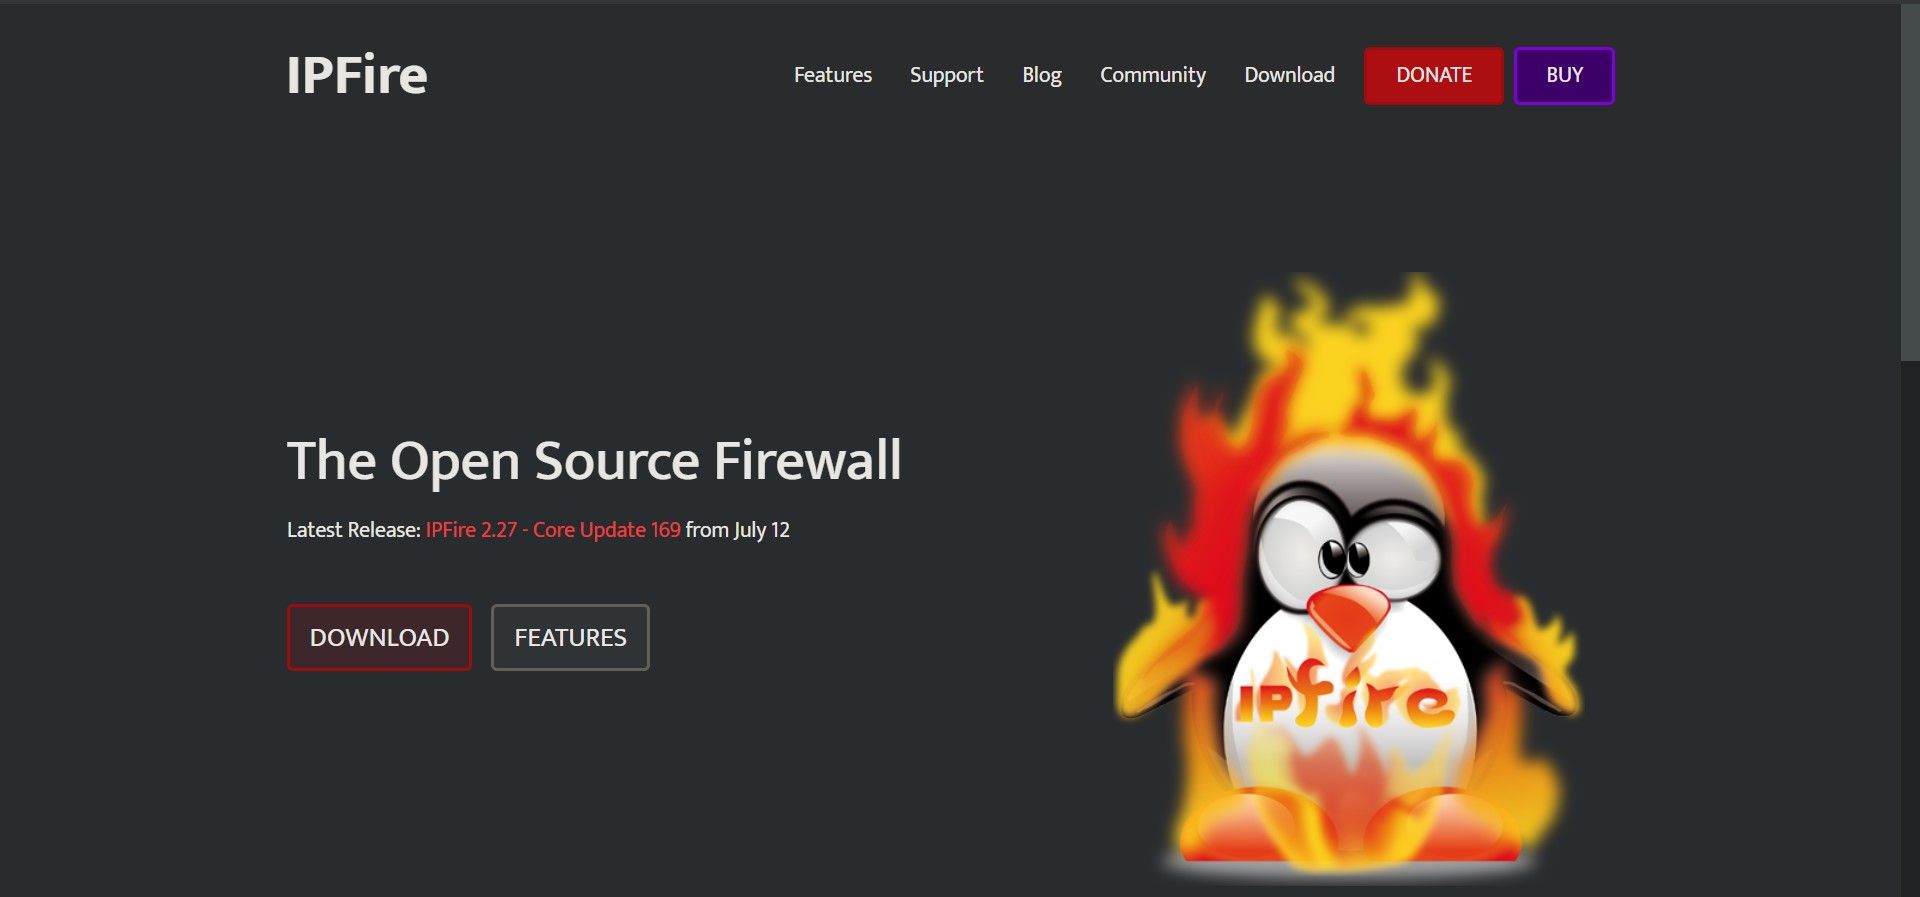 ipfire website home page